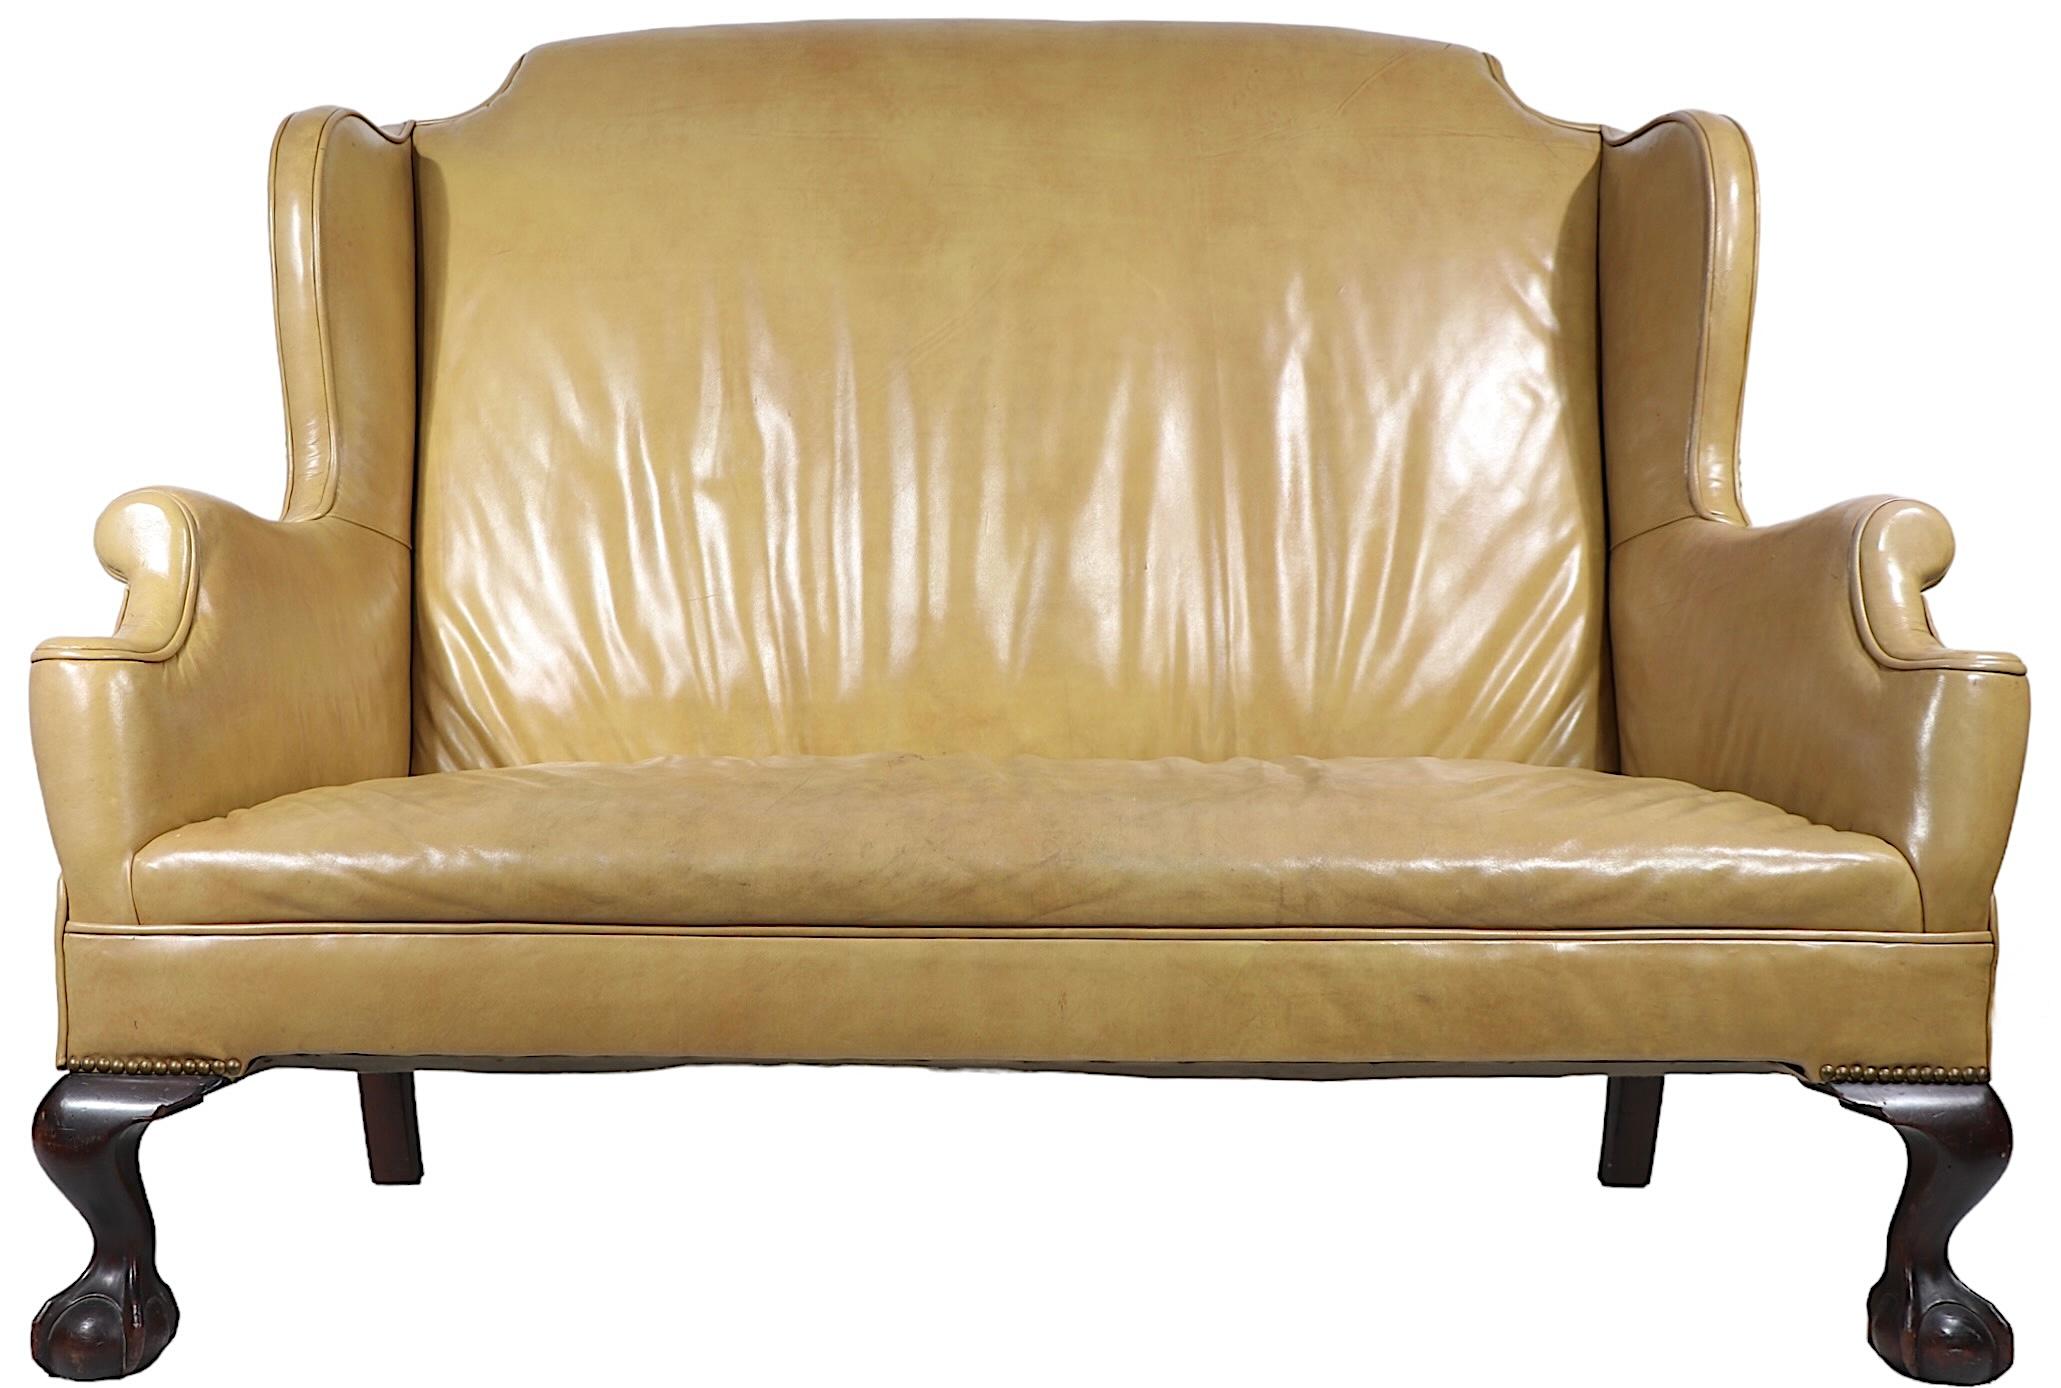 Chippendale Style Leather Loveseat from Ft. William Henry Hotel Lake George N.Y. For Sale 2